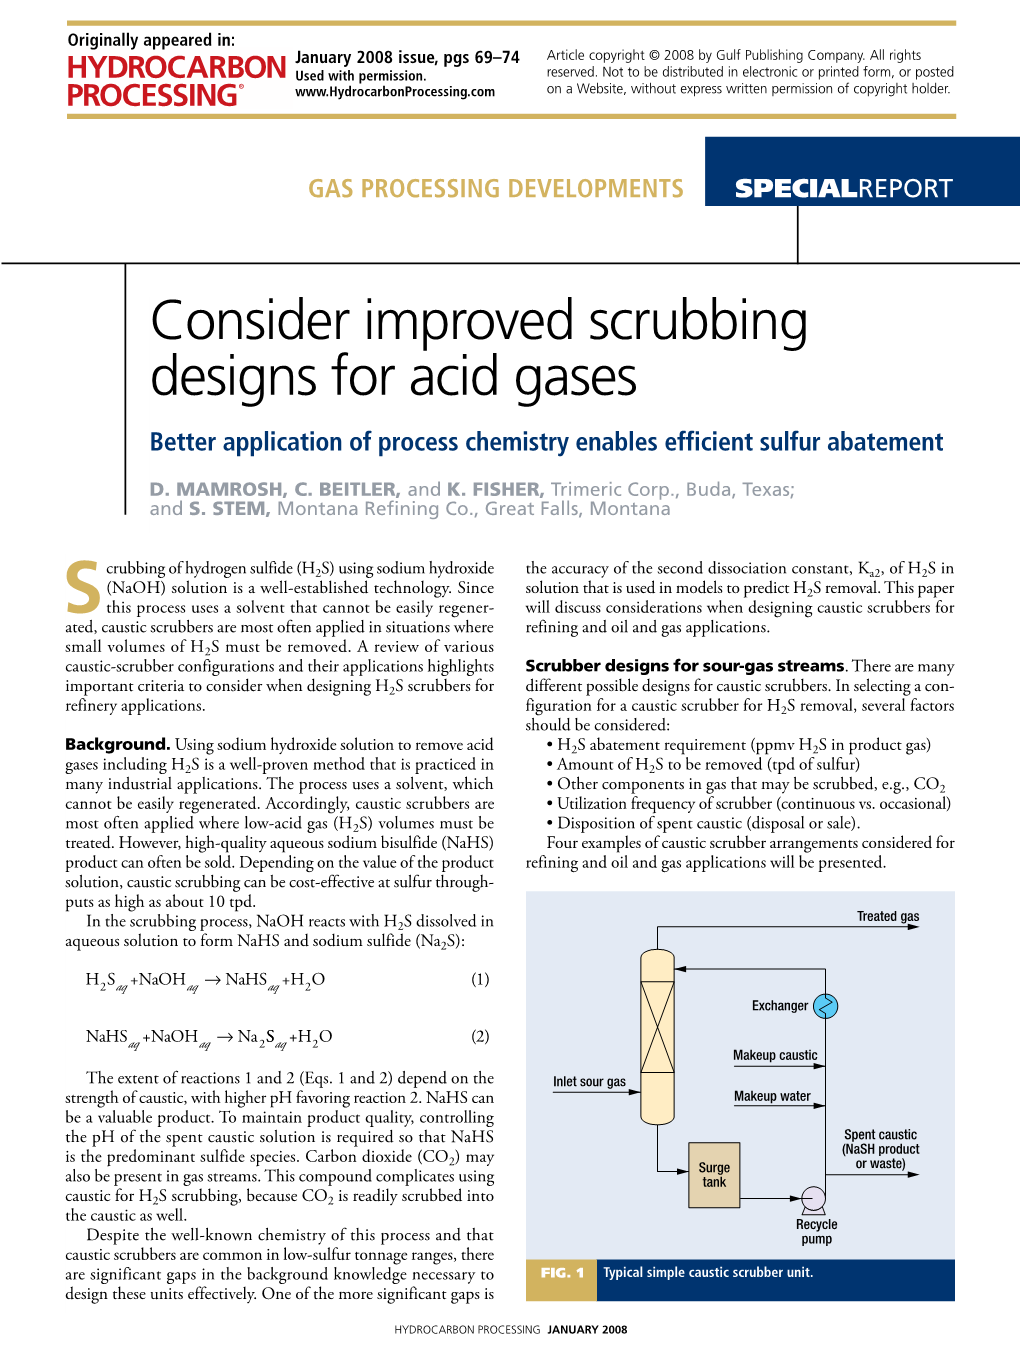 Consider Improved Scrubbing Designs for Acid Gases Better Application of Process Chemistry Enables Efficient Sulfur Abatement